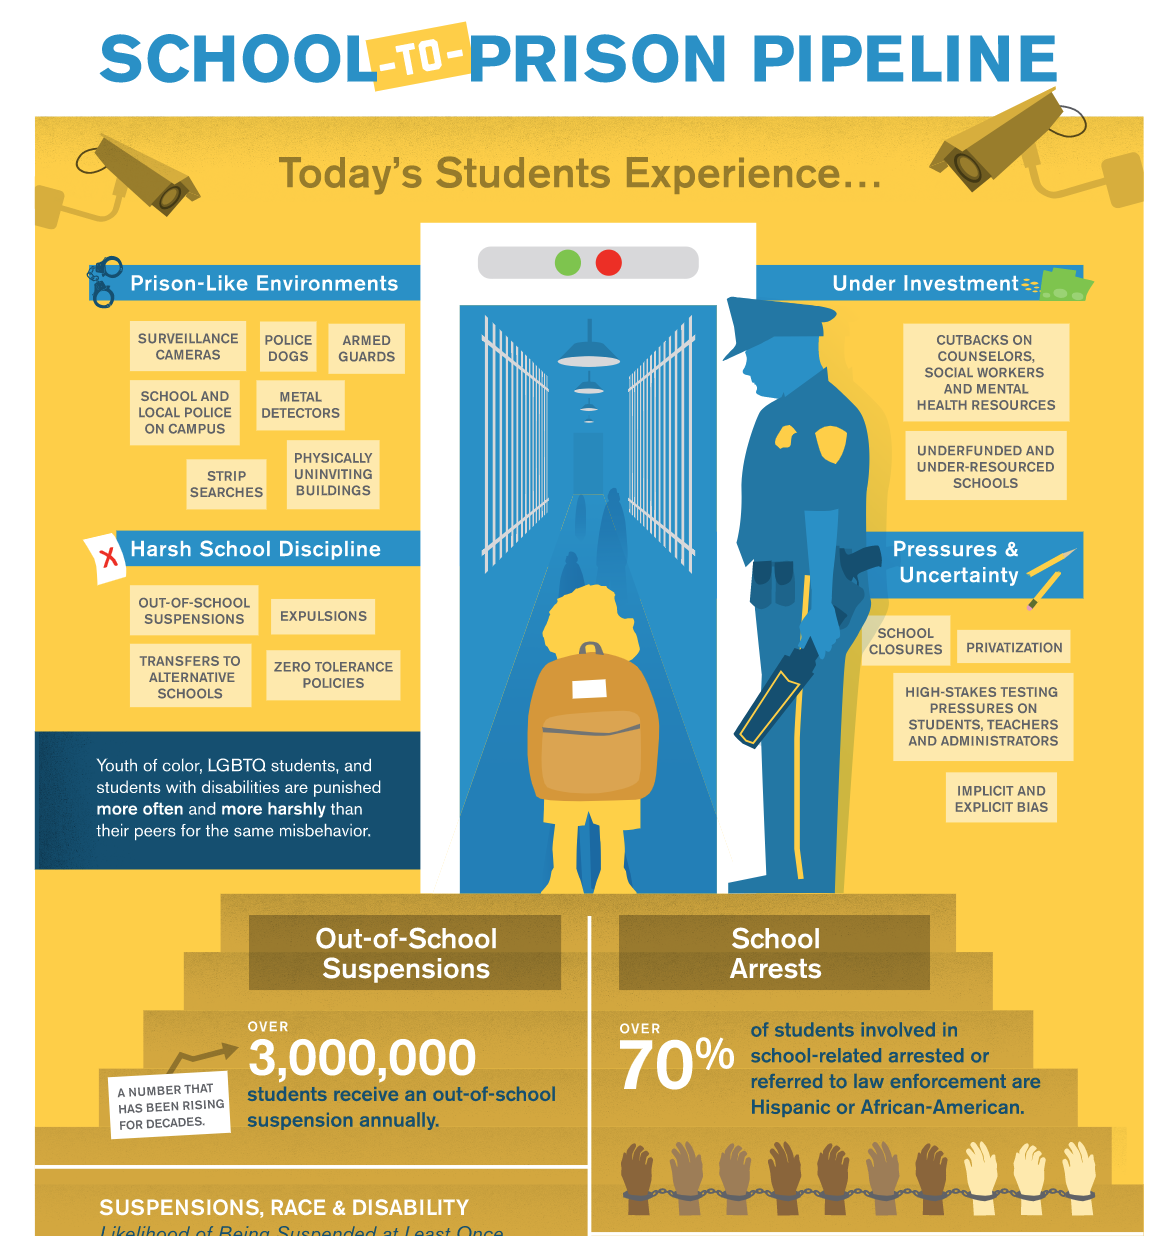 thesis statement school to prison pipeline